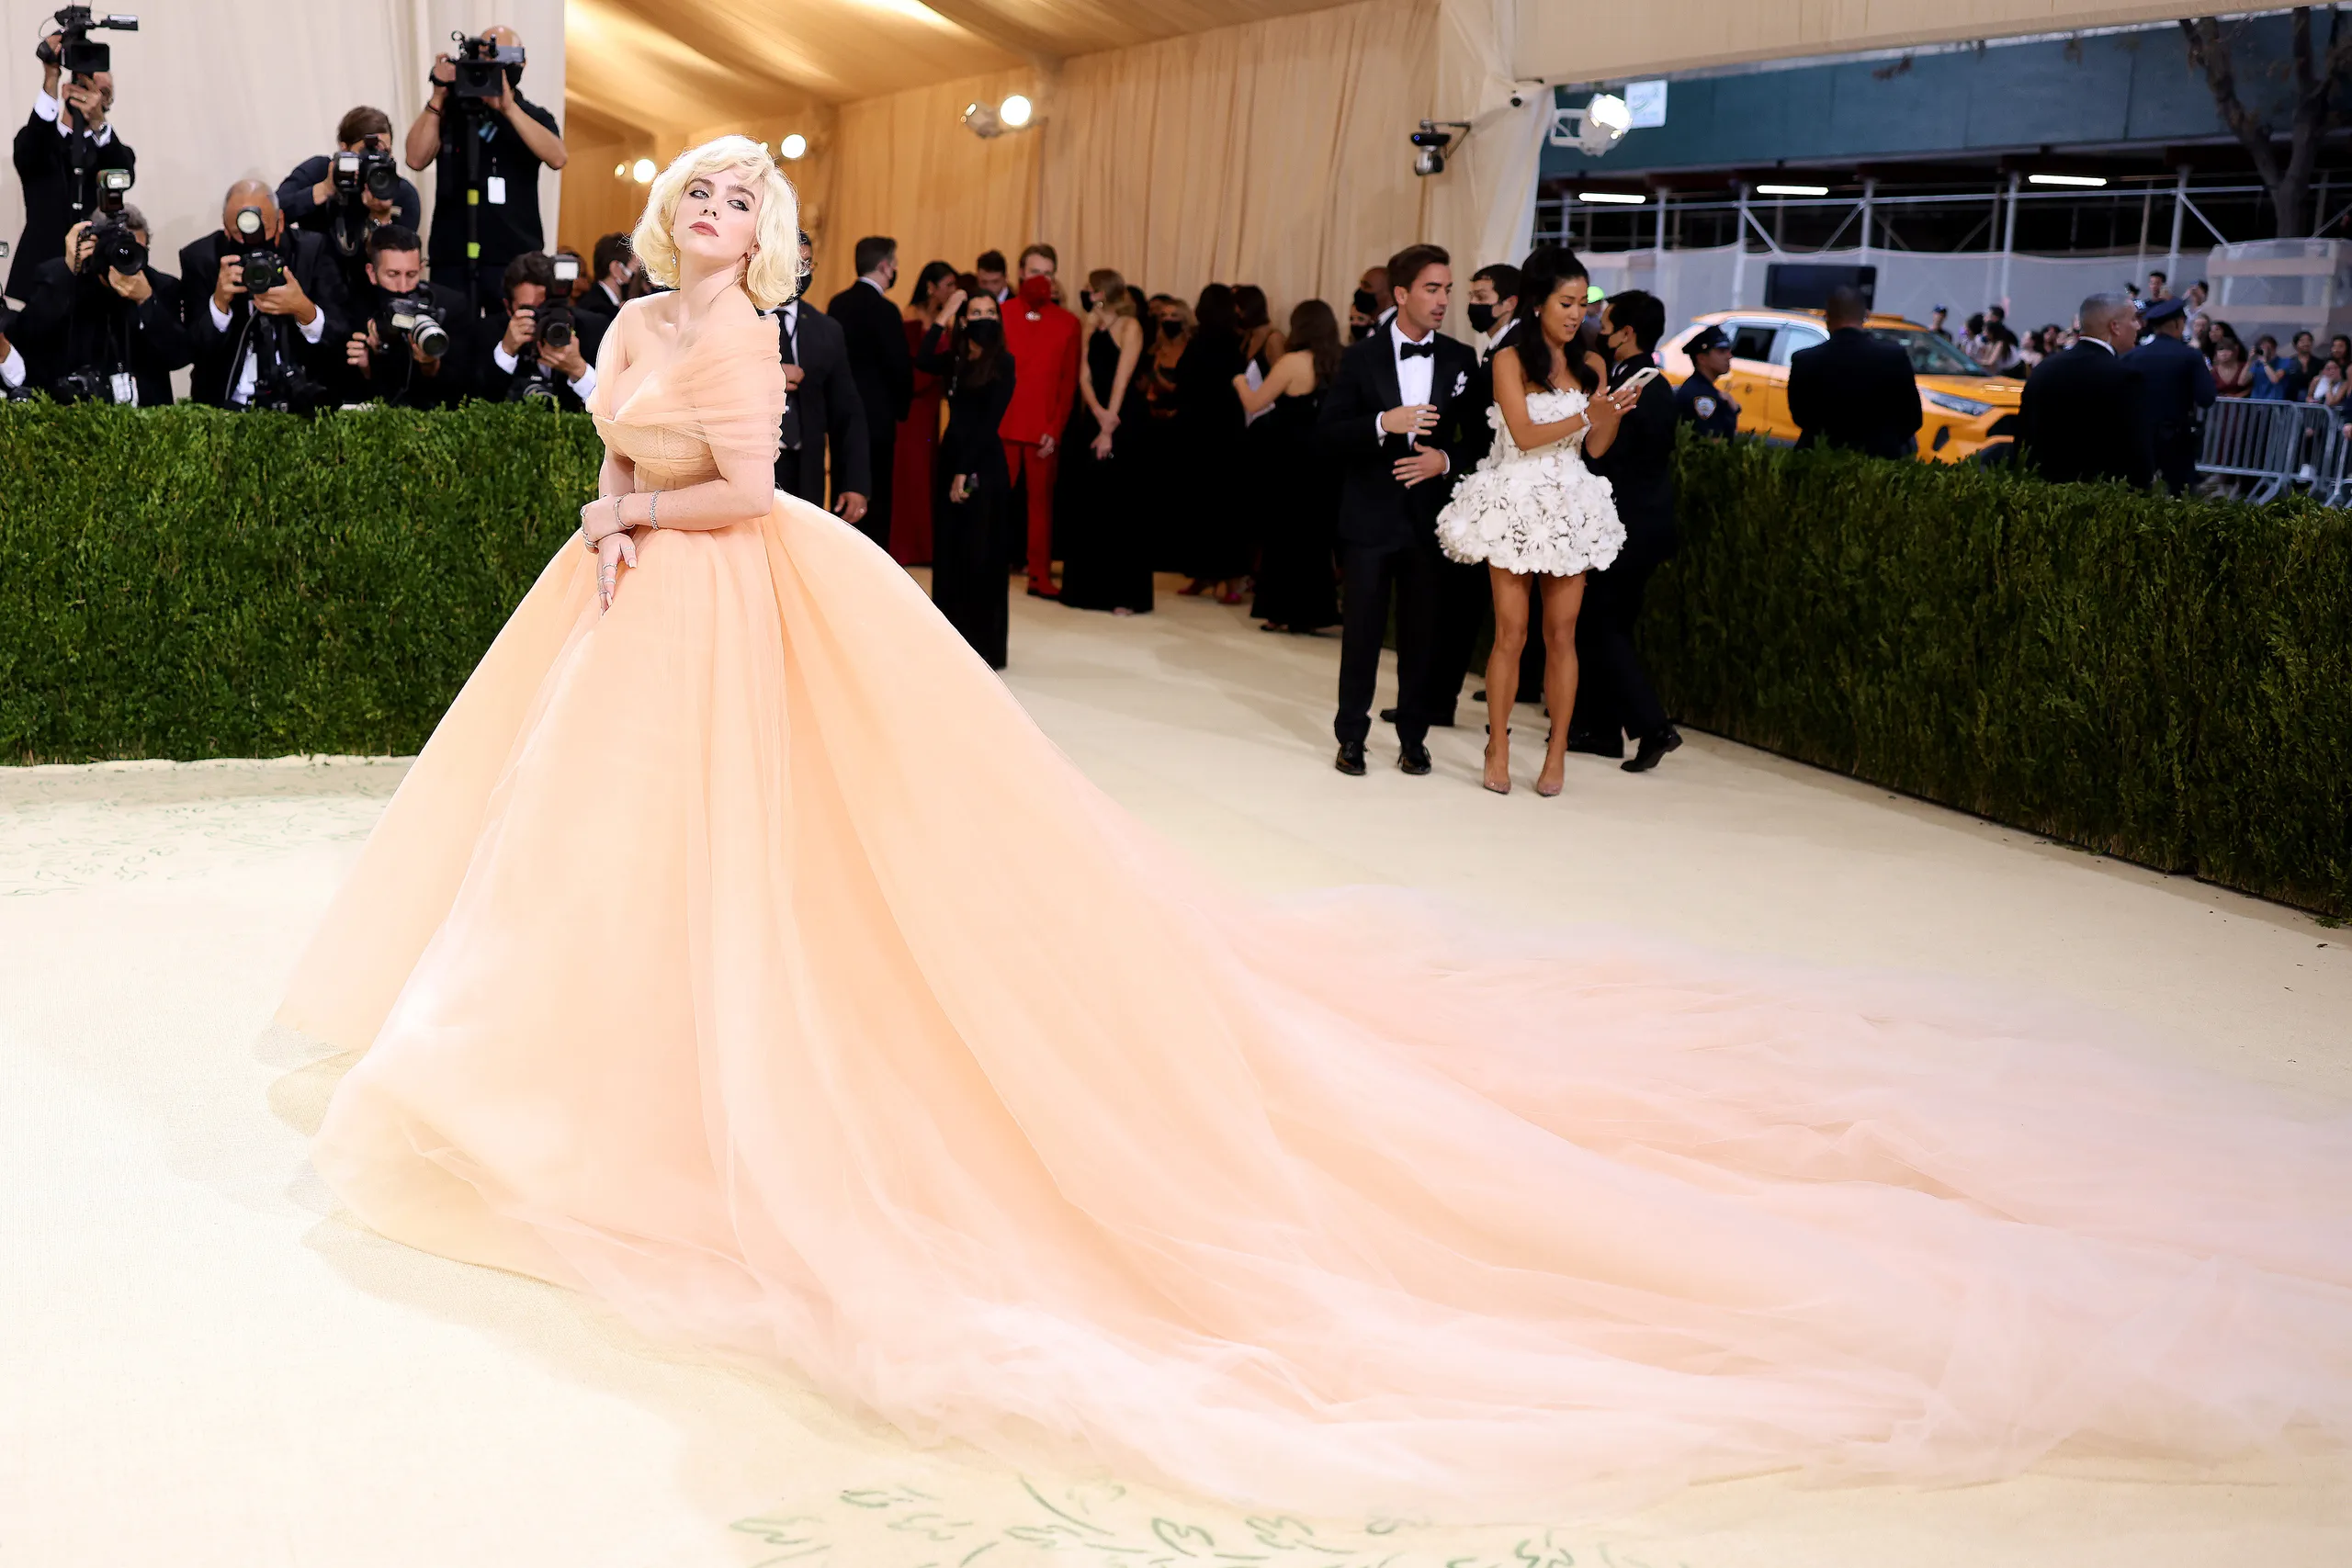 Met gala exhibit examines American fashion, frame by frame